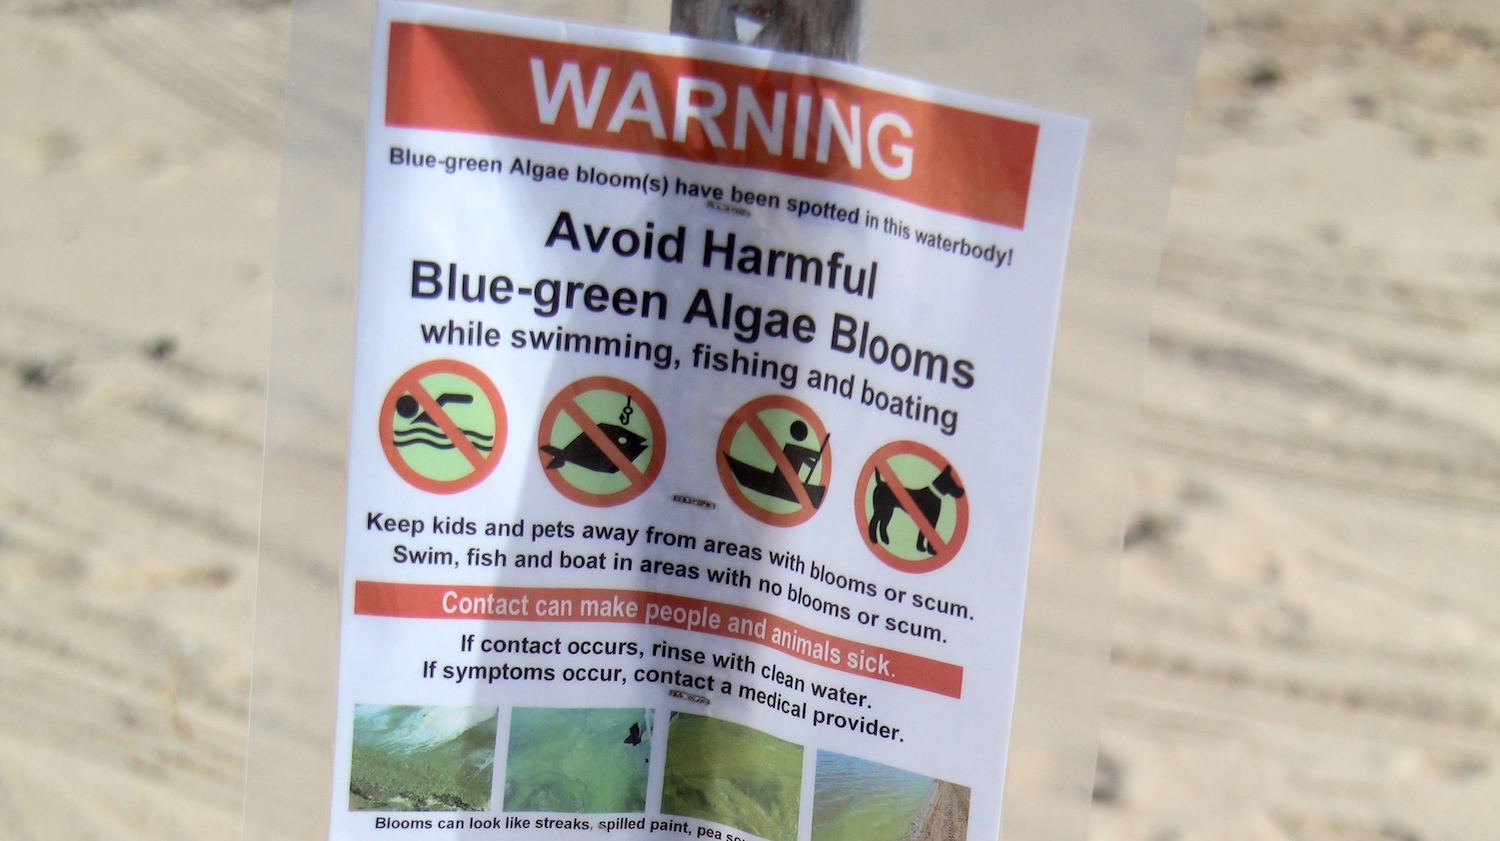 Warning sign for algae blooms in waters of EH Durell Godfrey photo EH Star